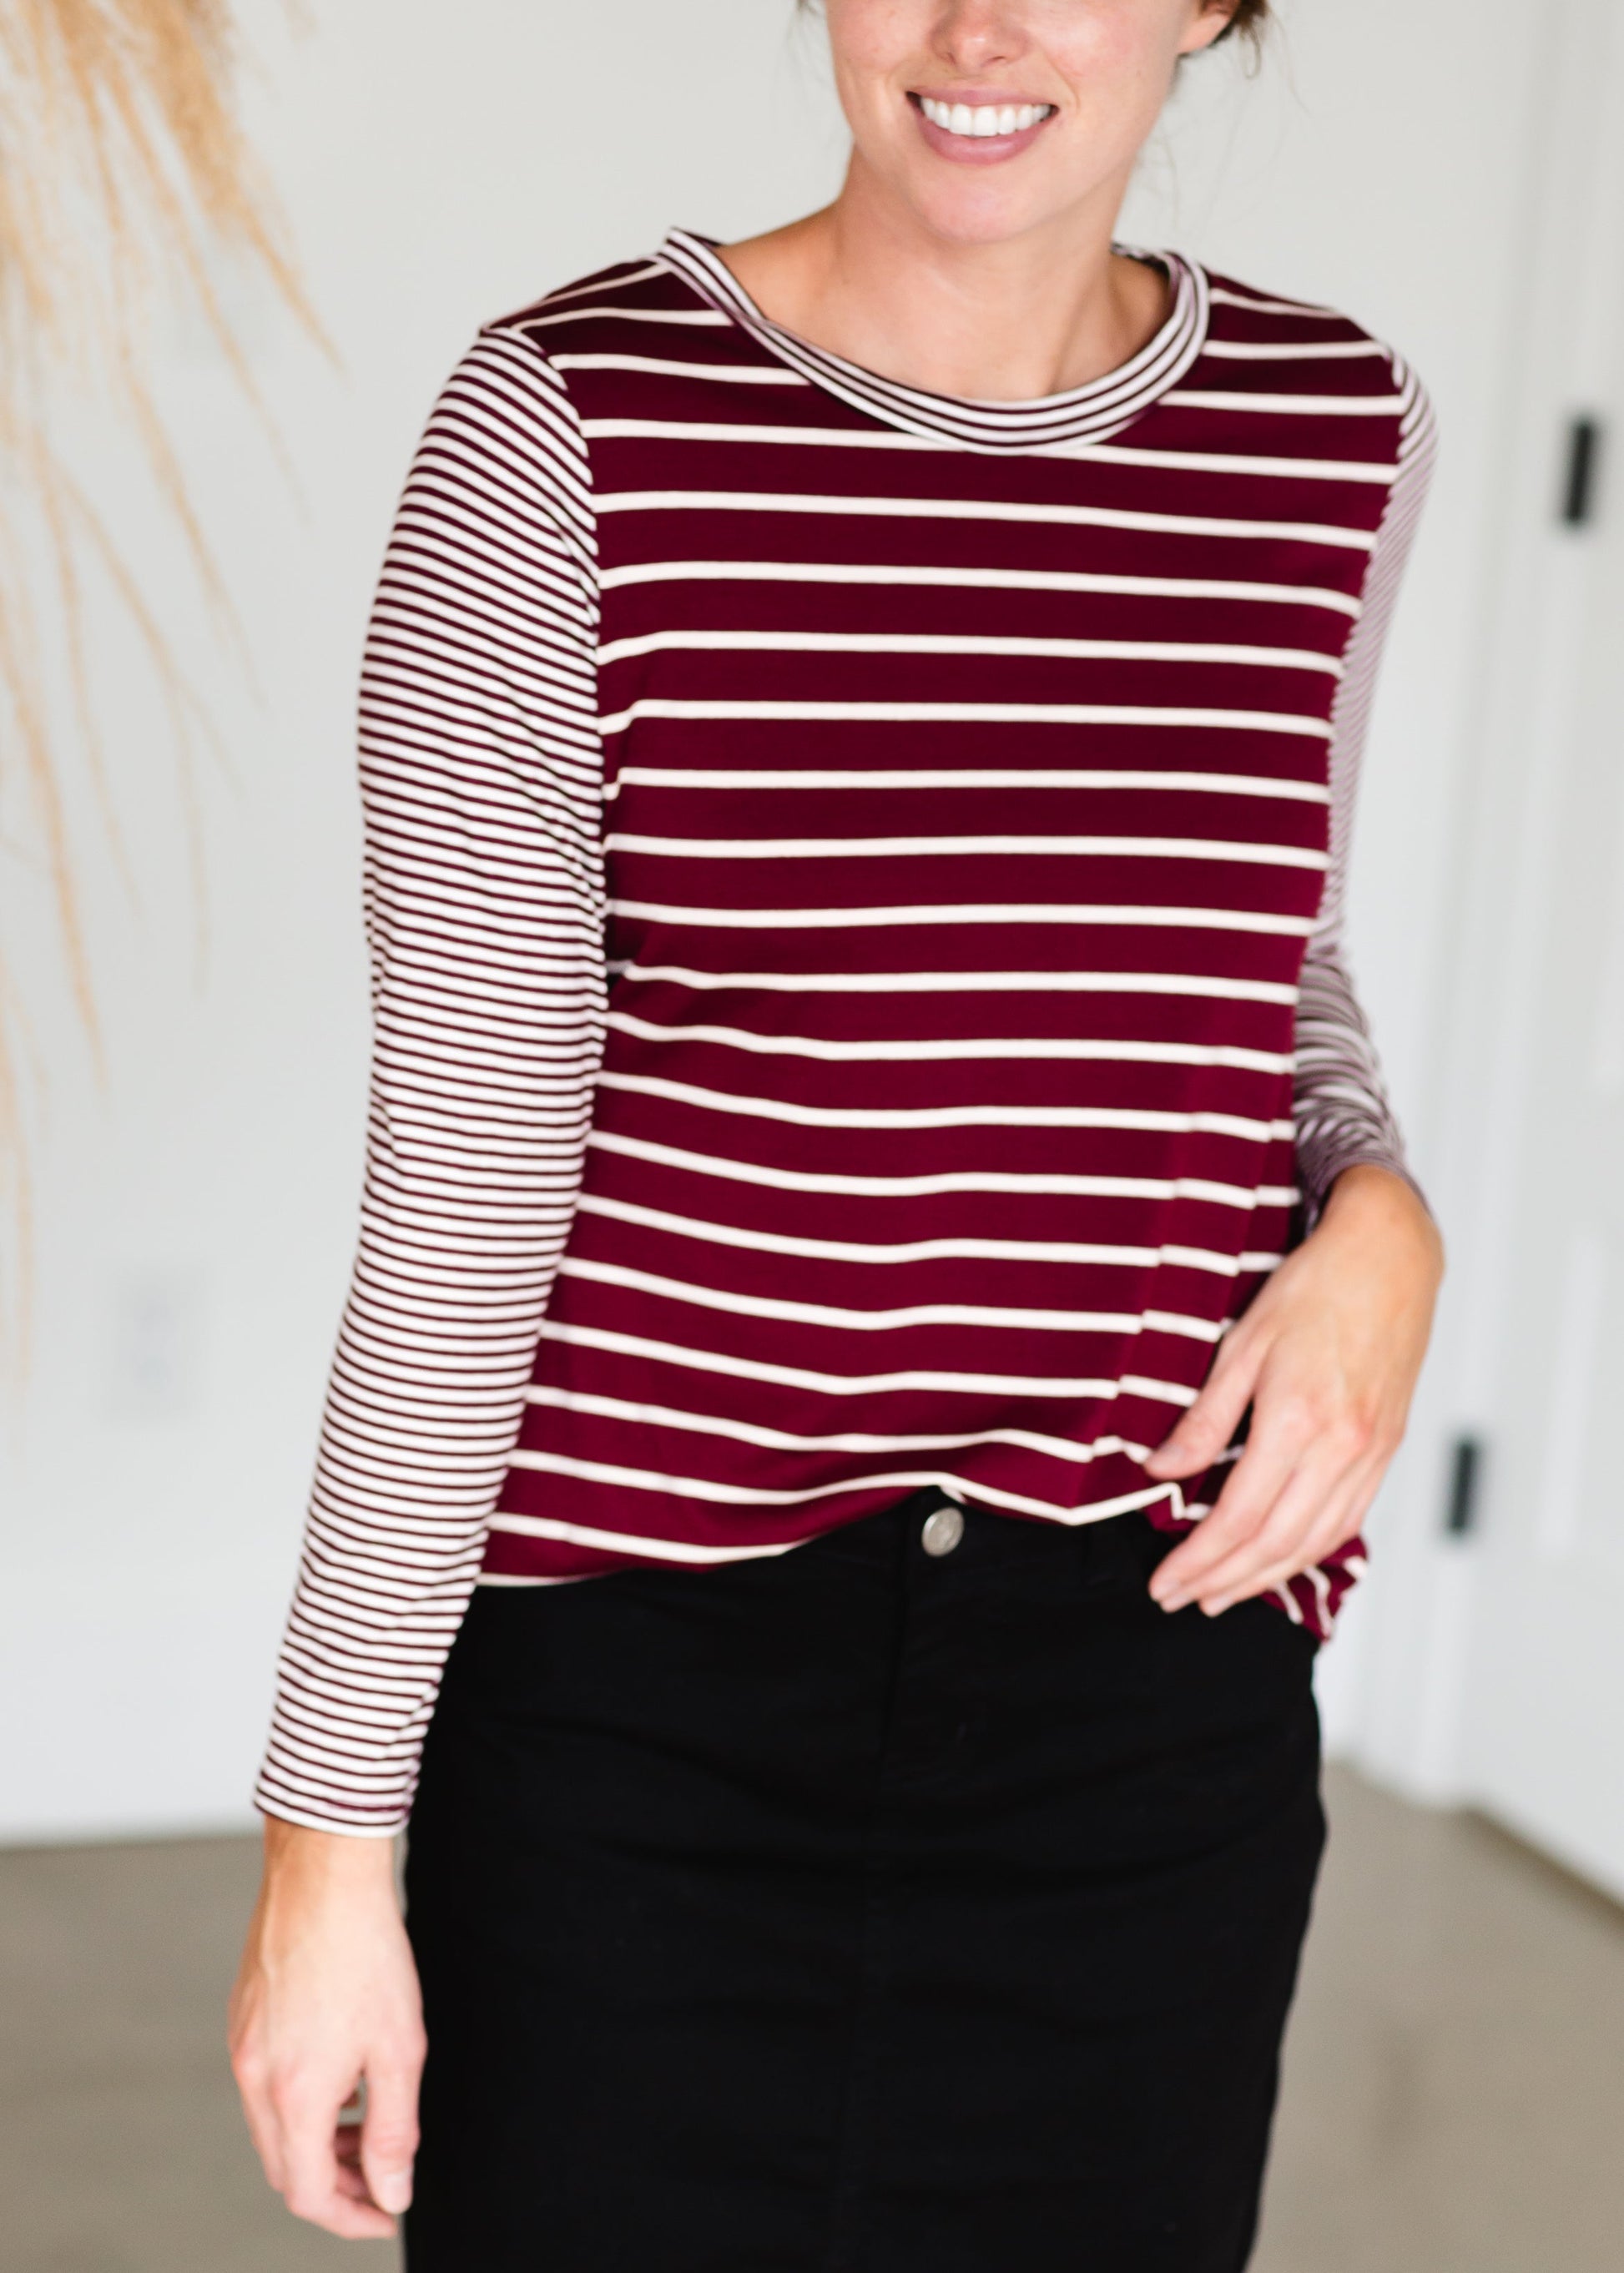 Burgundy Mixed Striped Long Sleeve Top - FINAL SALE Tops